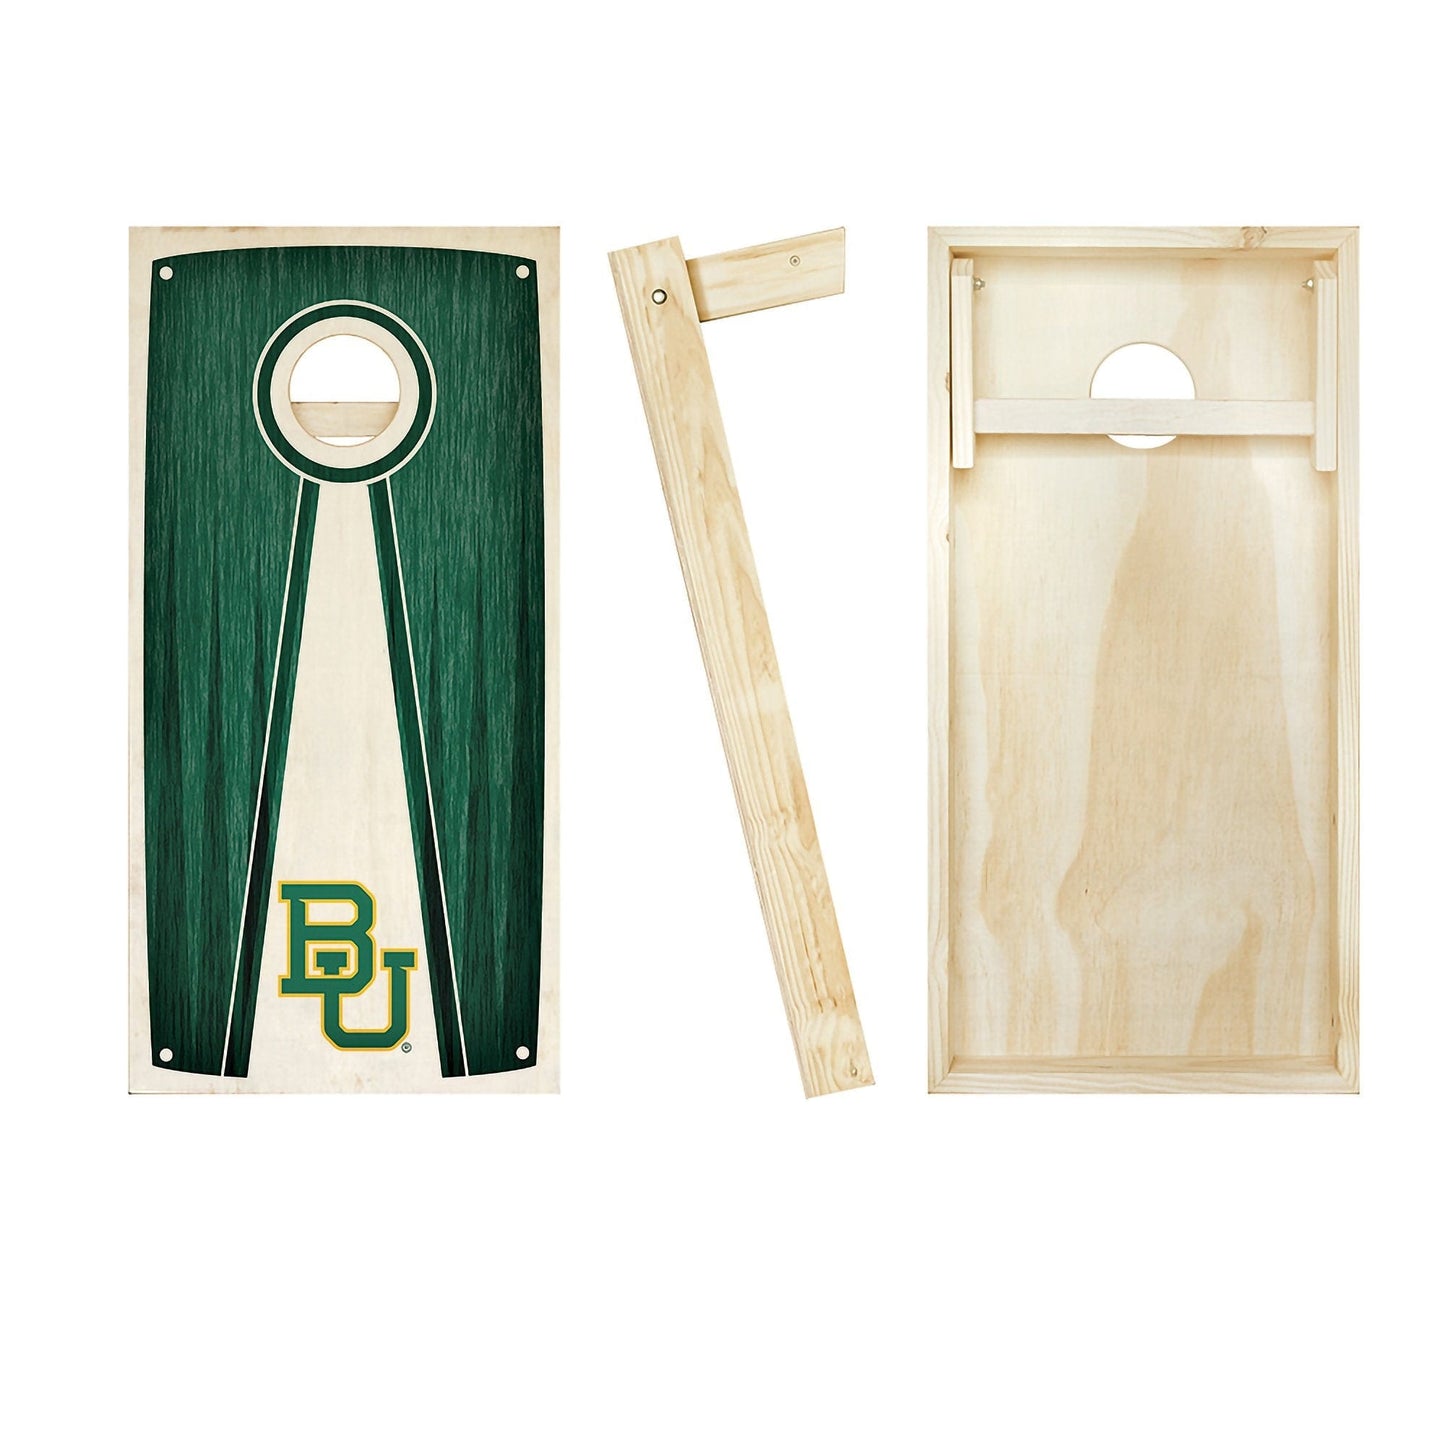 Baylor Bears Stained Pyramid board entire set